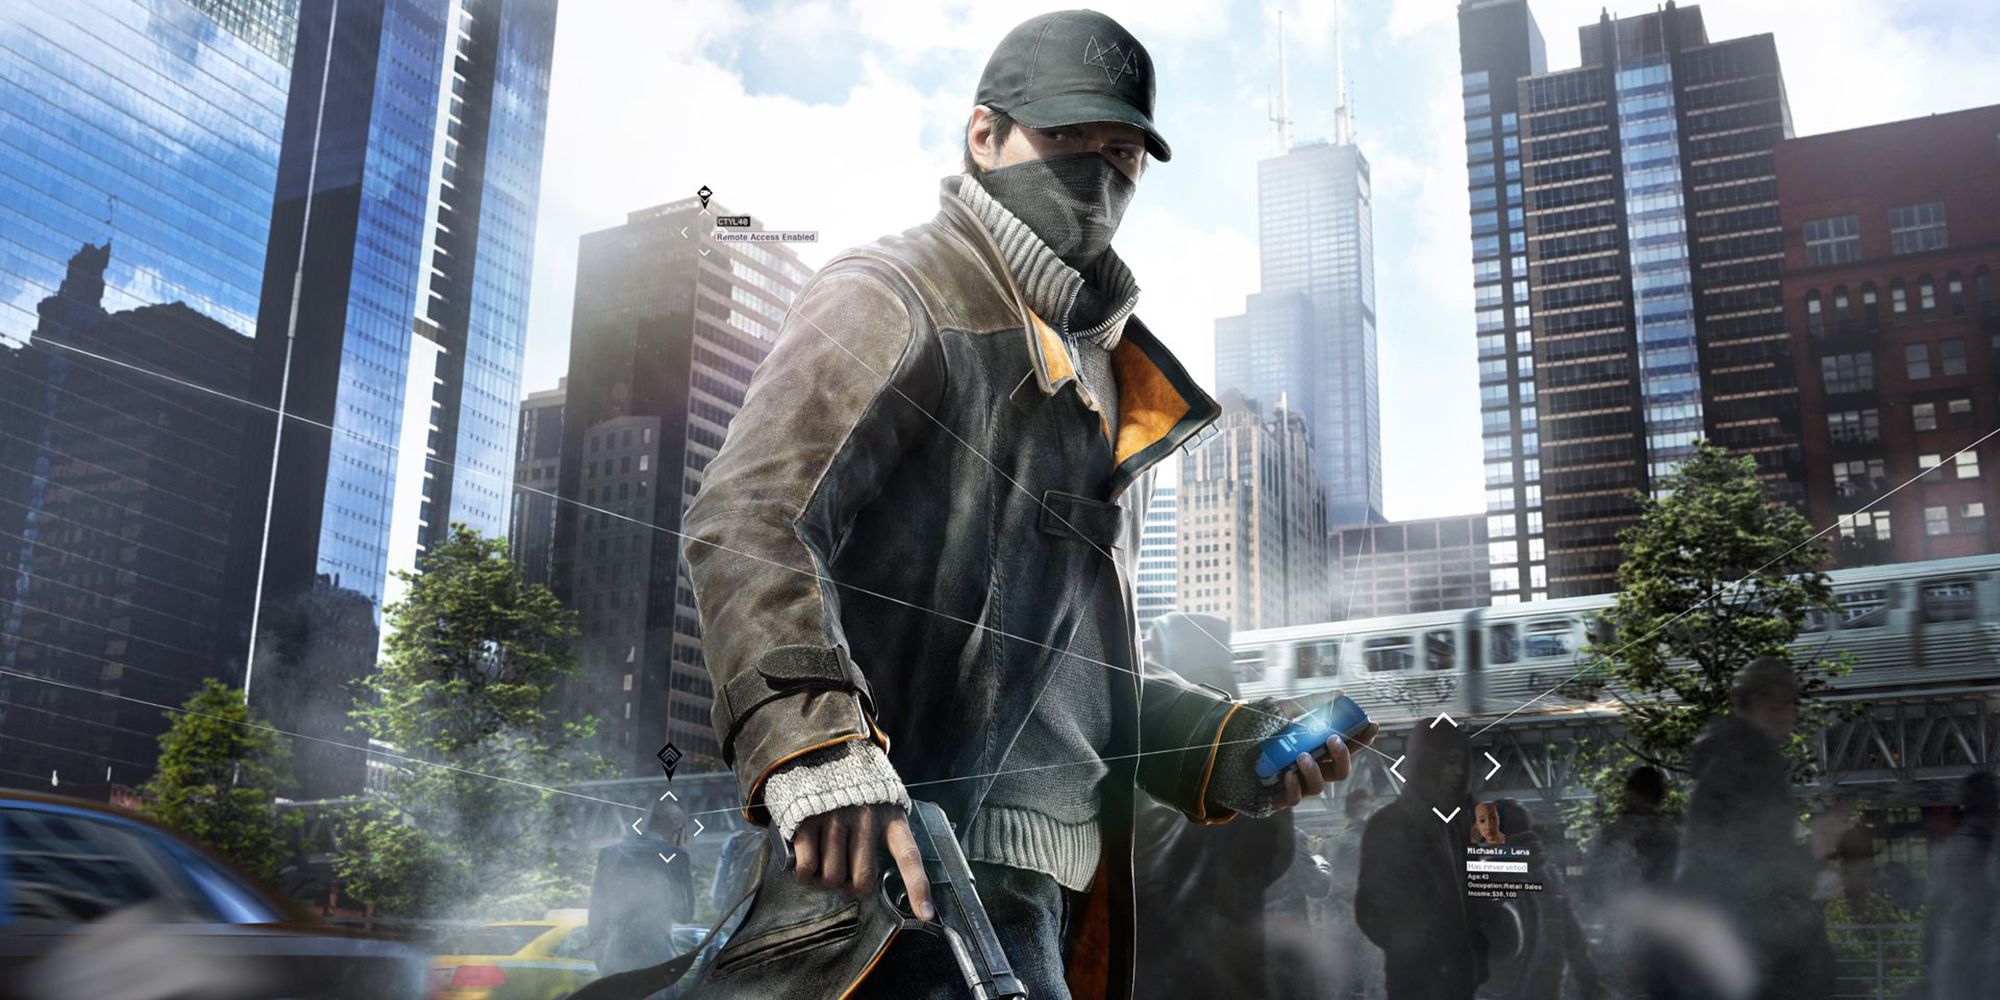 Aiden Pearce - Watch Dogs Series